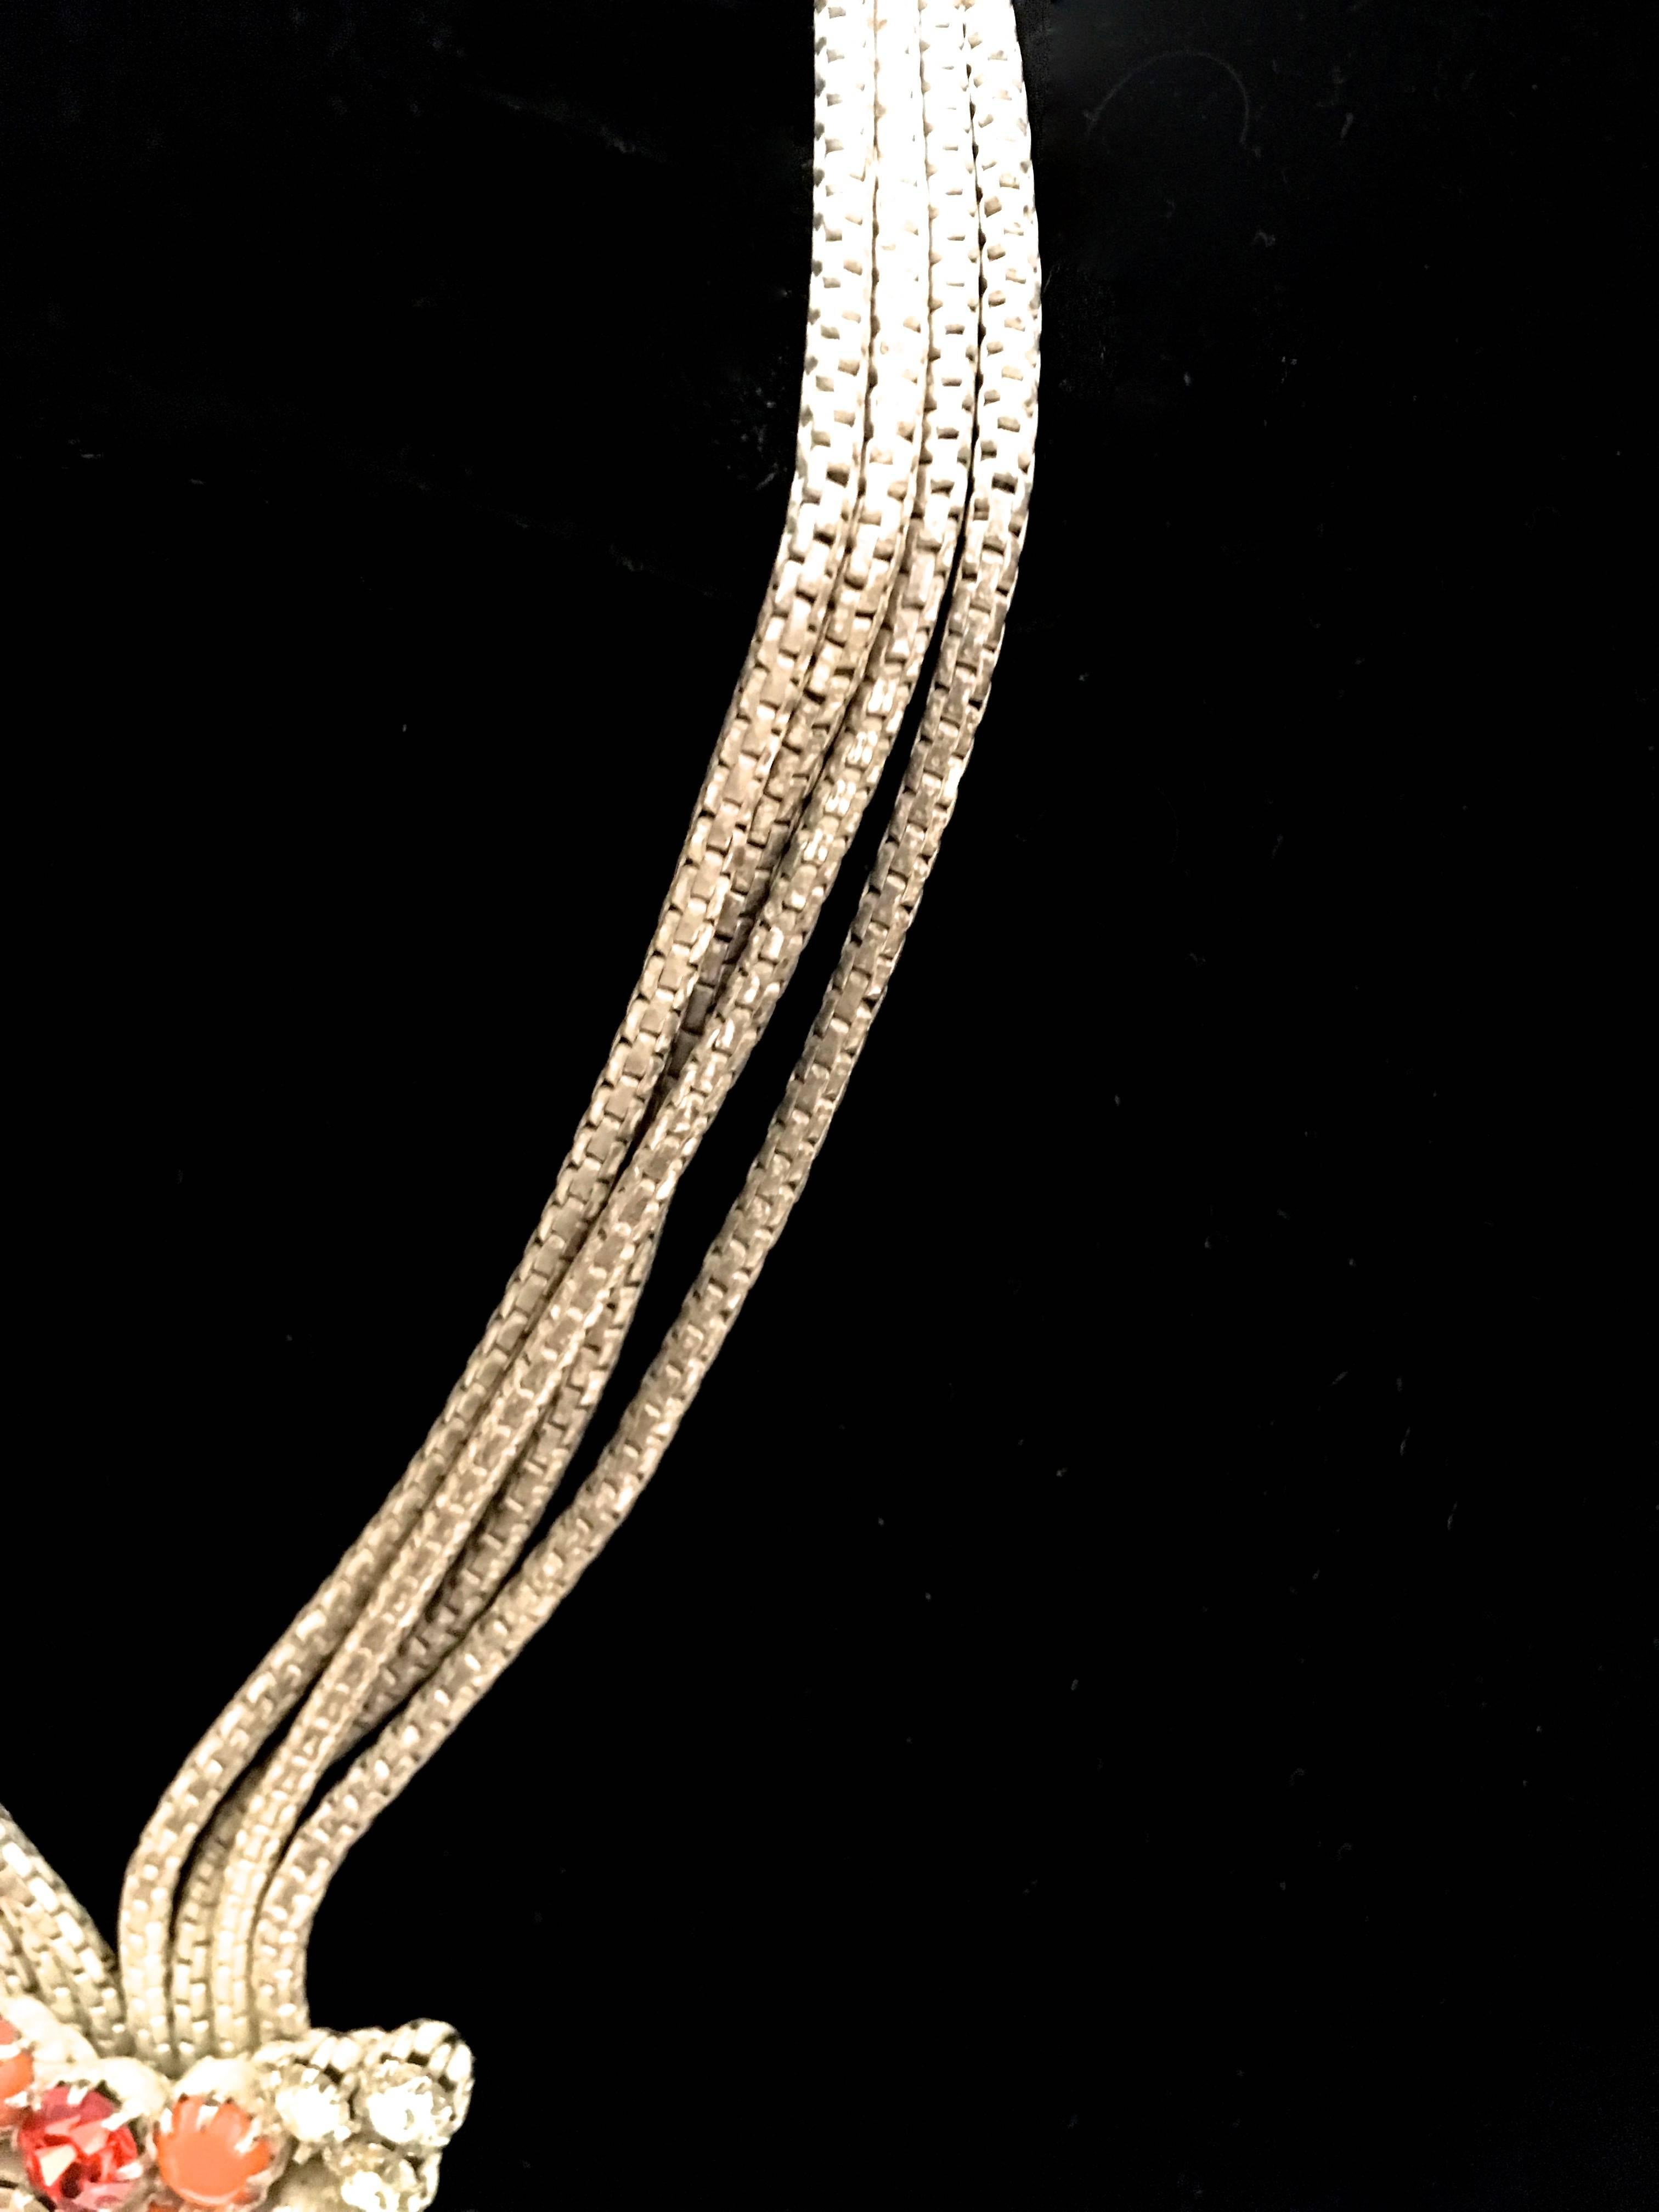 Presented here is a multi-strand rhinestone necklace. The necklace is comprised of four gorgeous bronze tone metal cords that end with a drop at the bottom of the necklace with an mixed array of white, orange and red circular rhinestones.  The metal